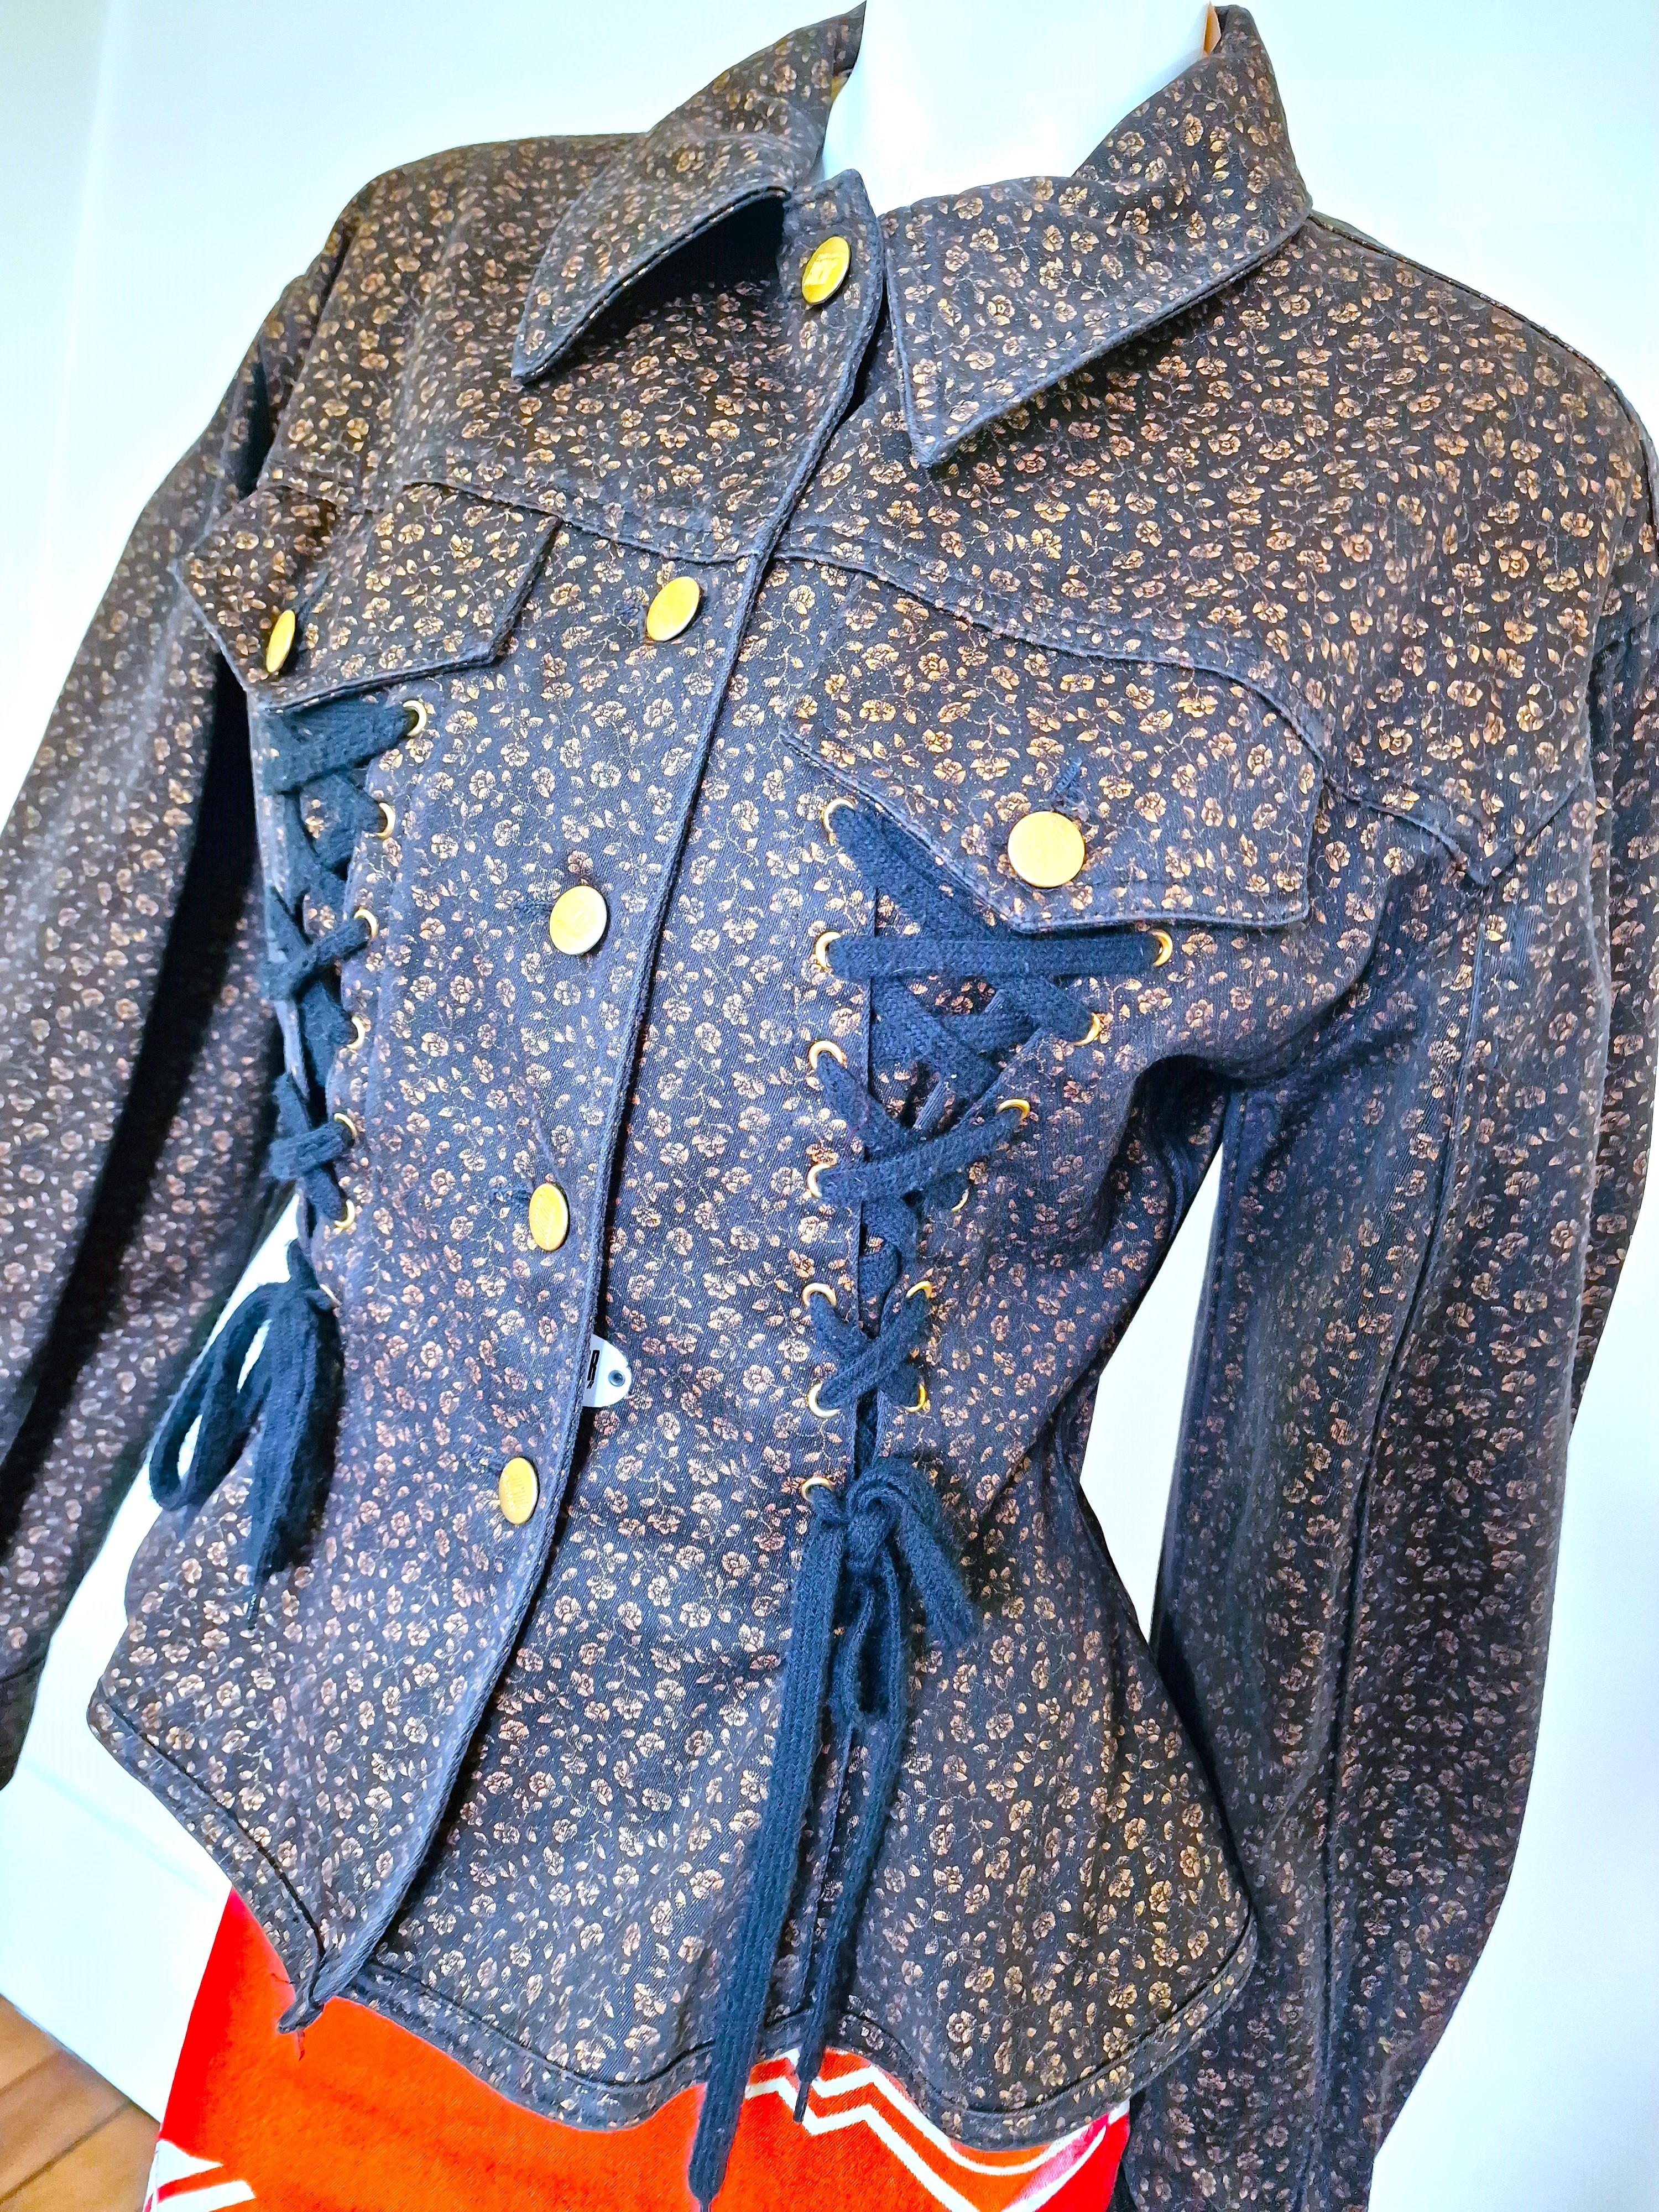 One of the most iconic Junior Gaultier pieces in the most adorable dark denim with golden flower pattern will snatch your waist! 
With oversized shoulders and corseted elements, although it pokes out at the 80s, it’s is still brilliantly 

EXCELLENT